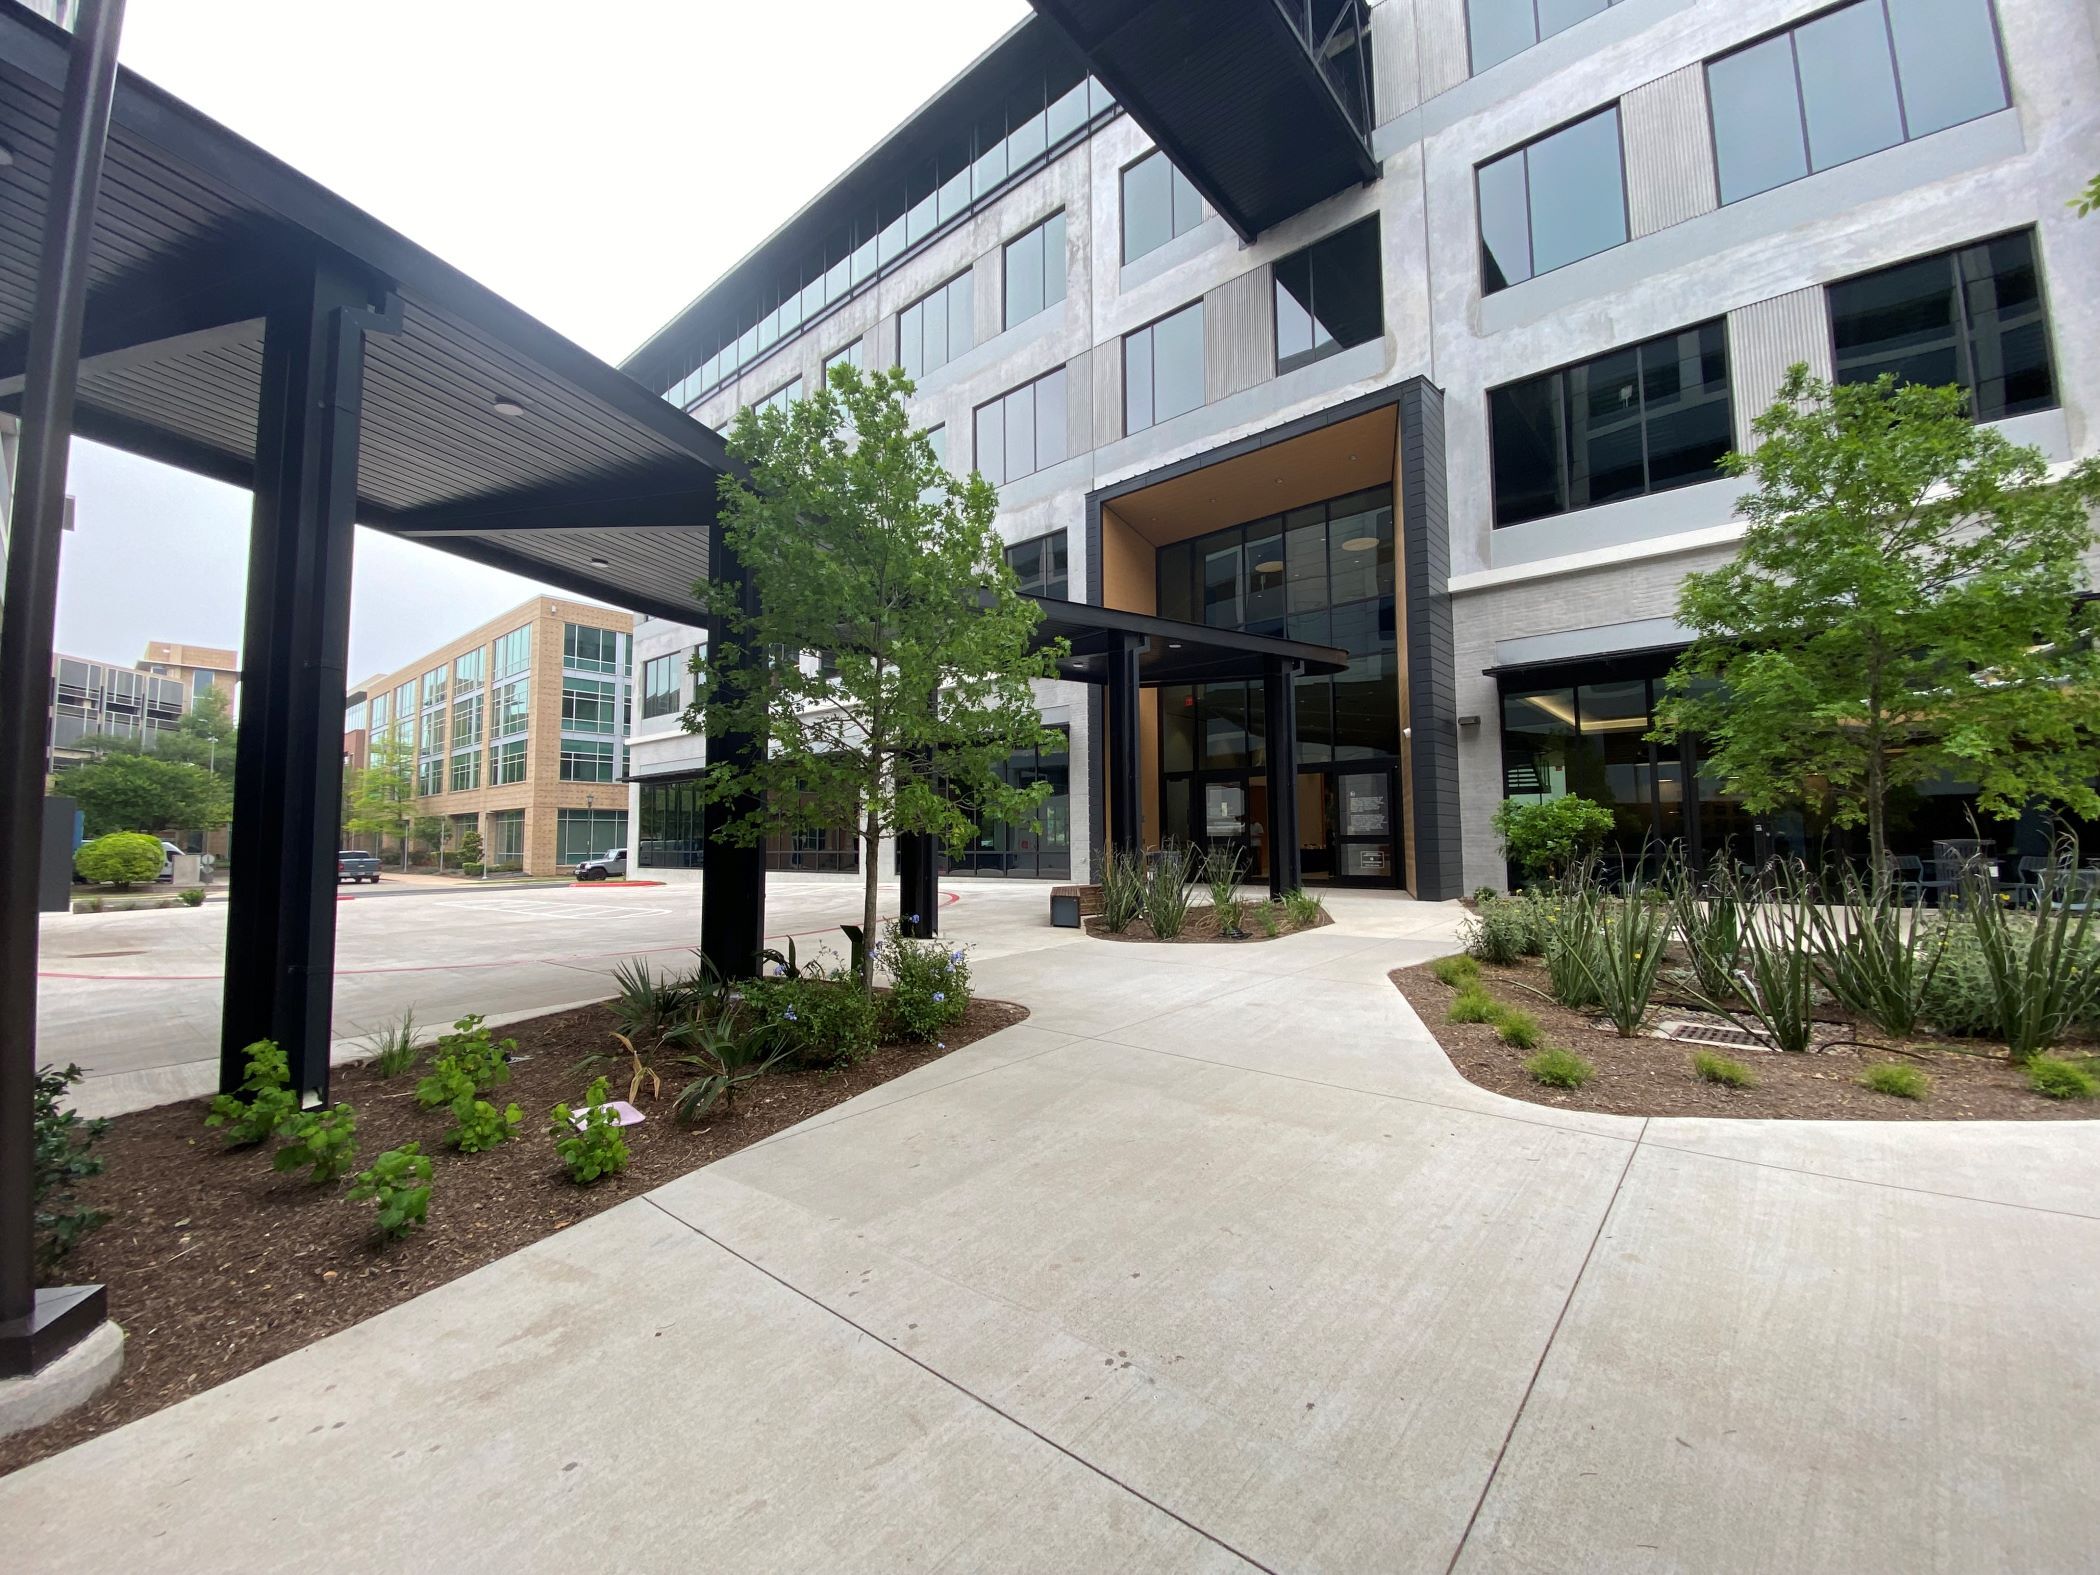 1401 Philomena at Mueller is the newest medical office building in Austin. Pictured here is the courtyard entrance, with a turnaround in front of the main doors. (Parimal M. Rohit/CoStar News)